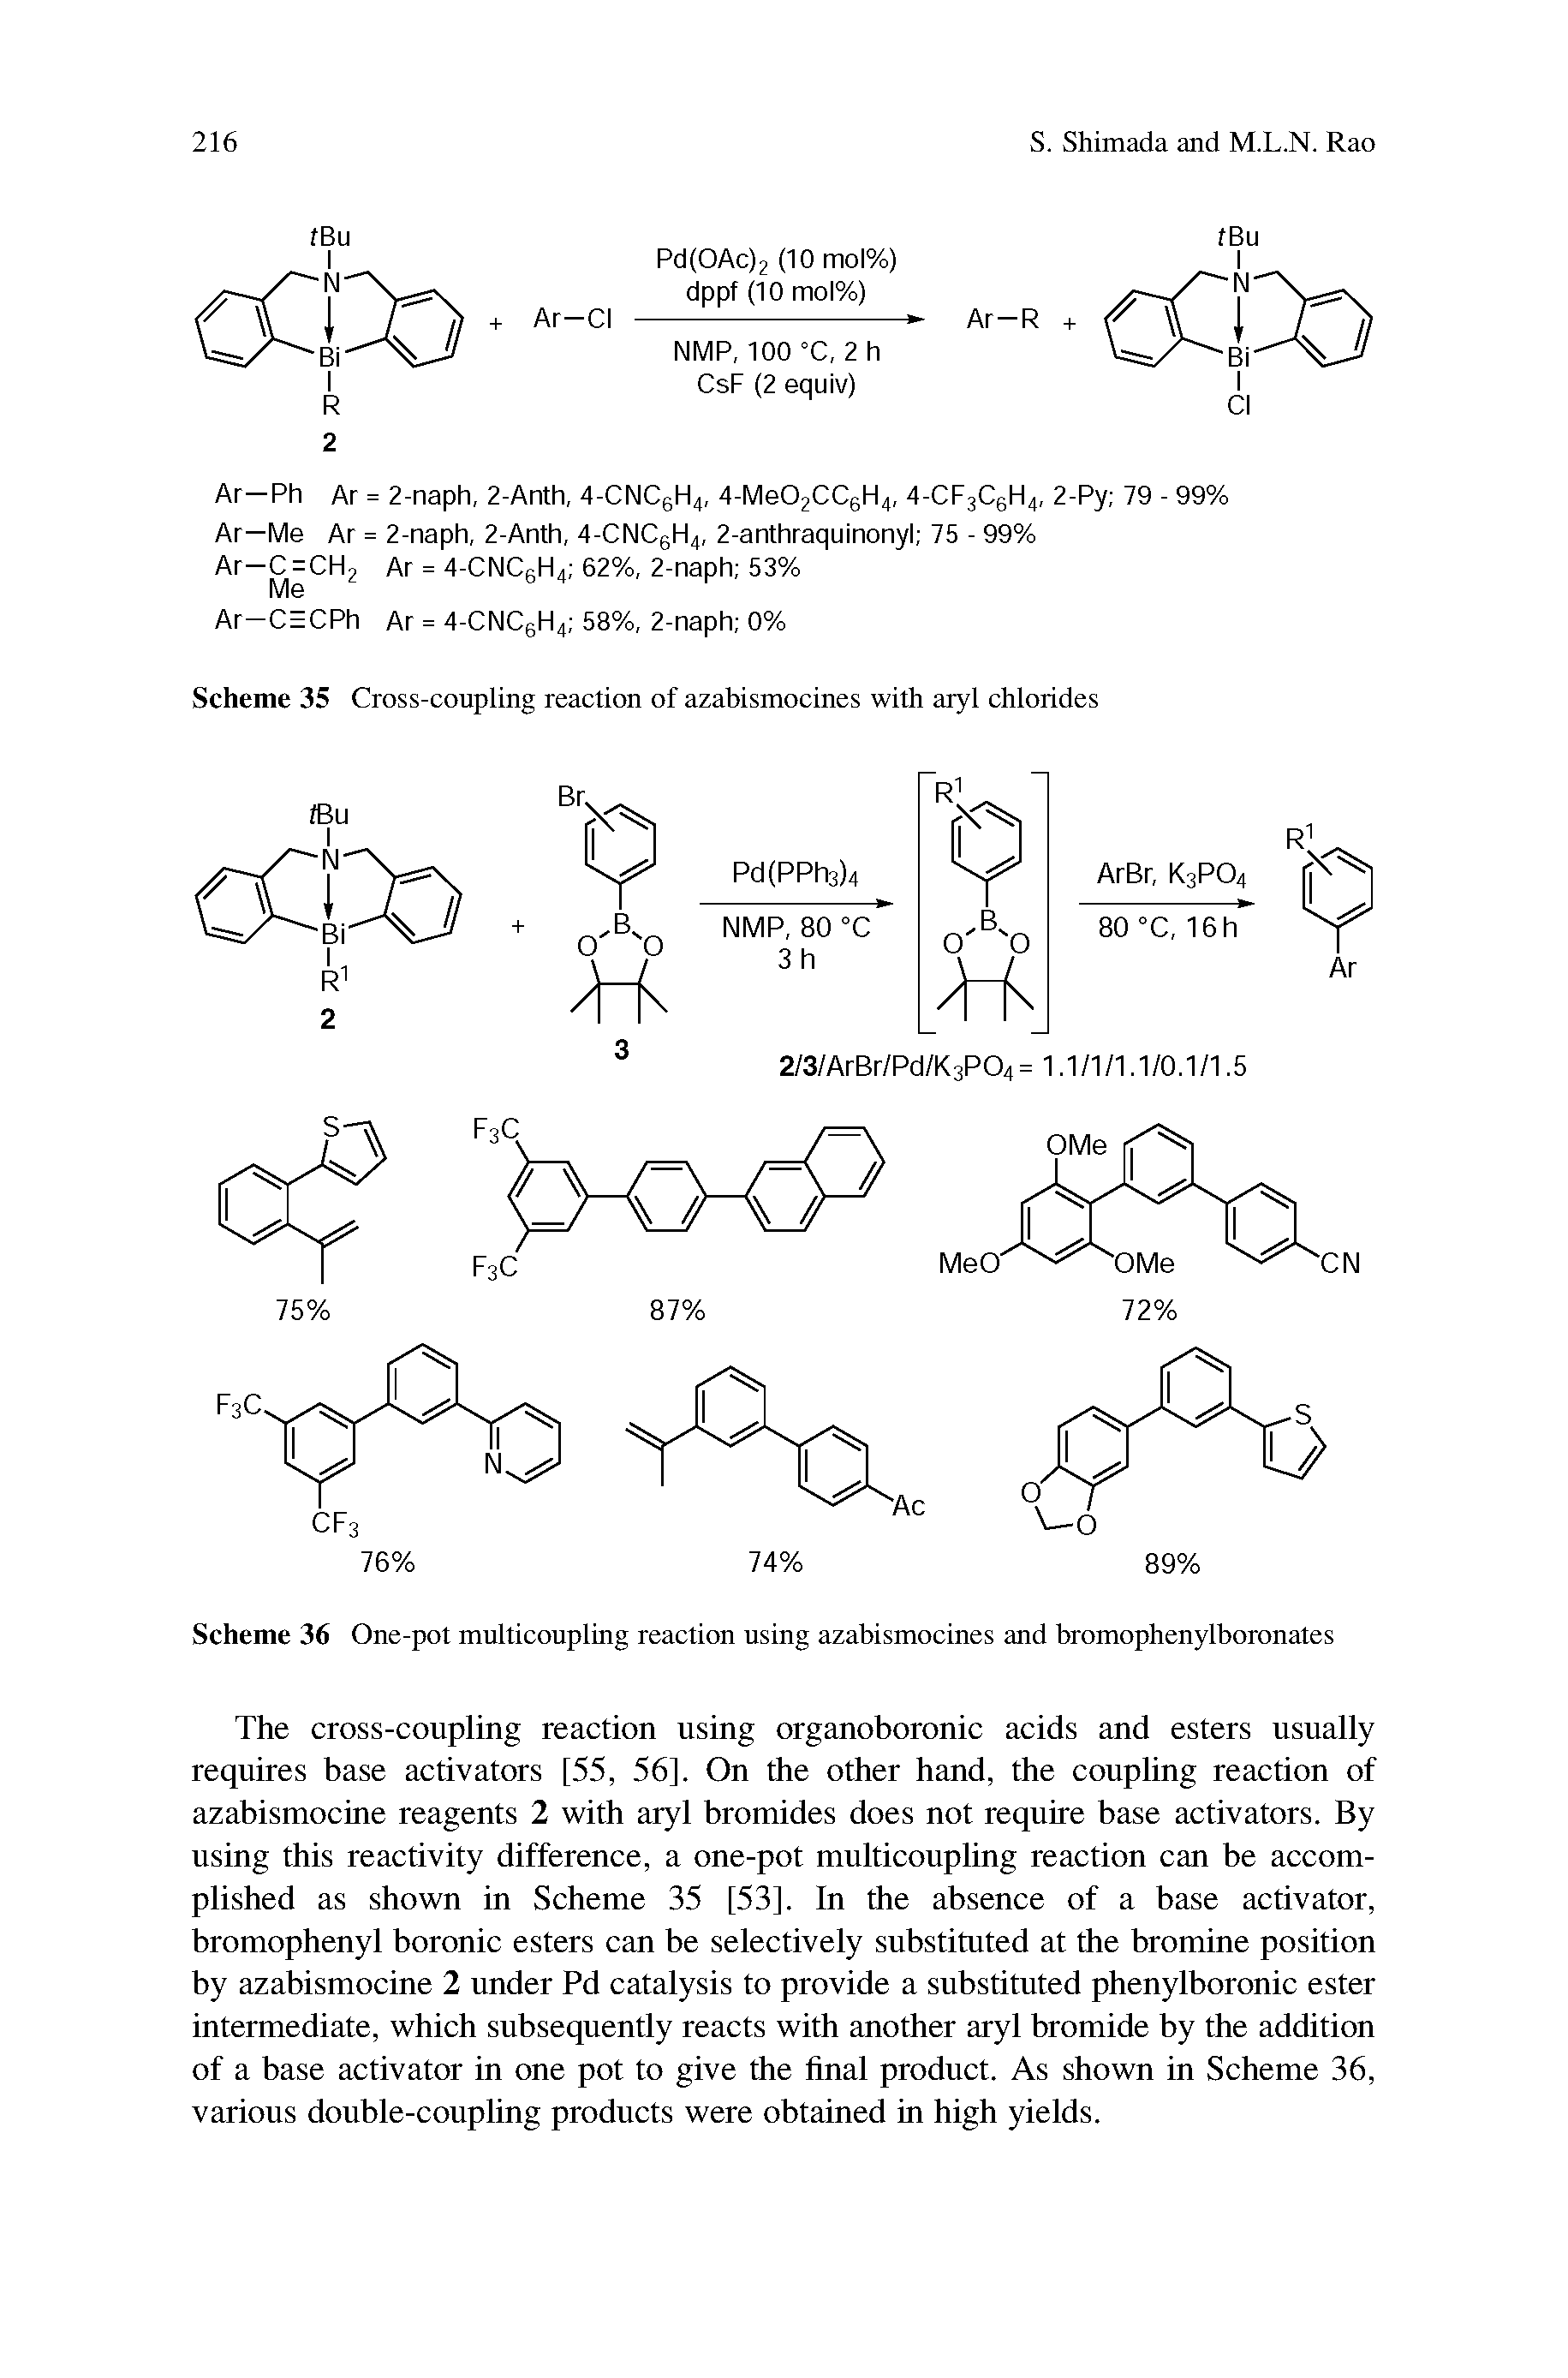 Scheme 35 Cross-coupling reaction of azabismocines with aryl chlorides...